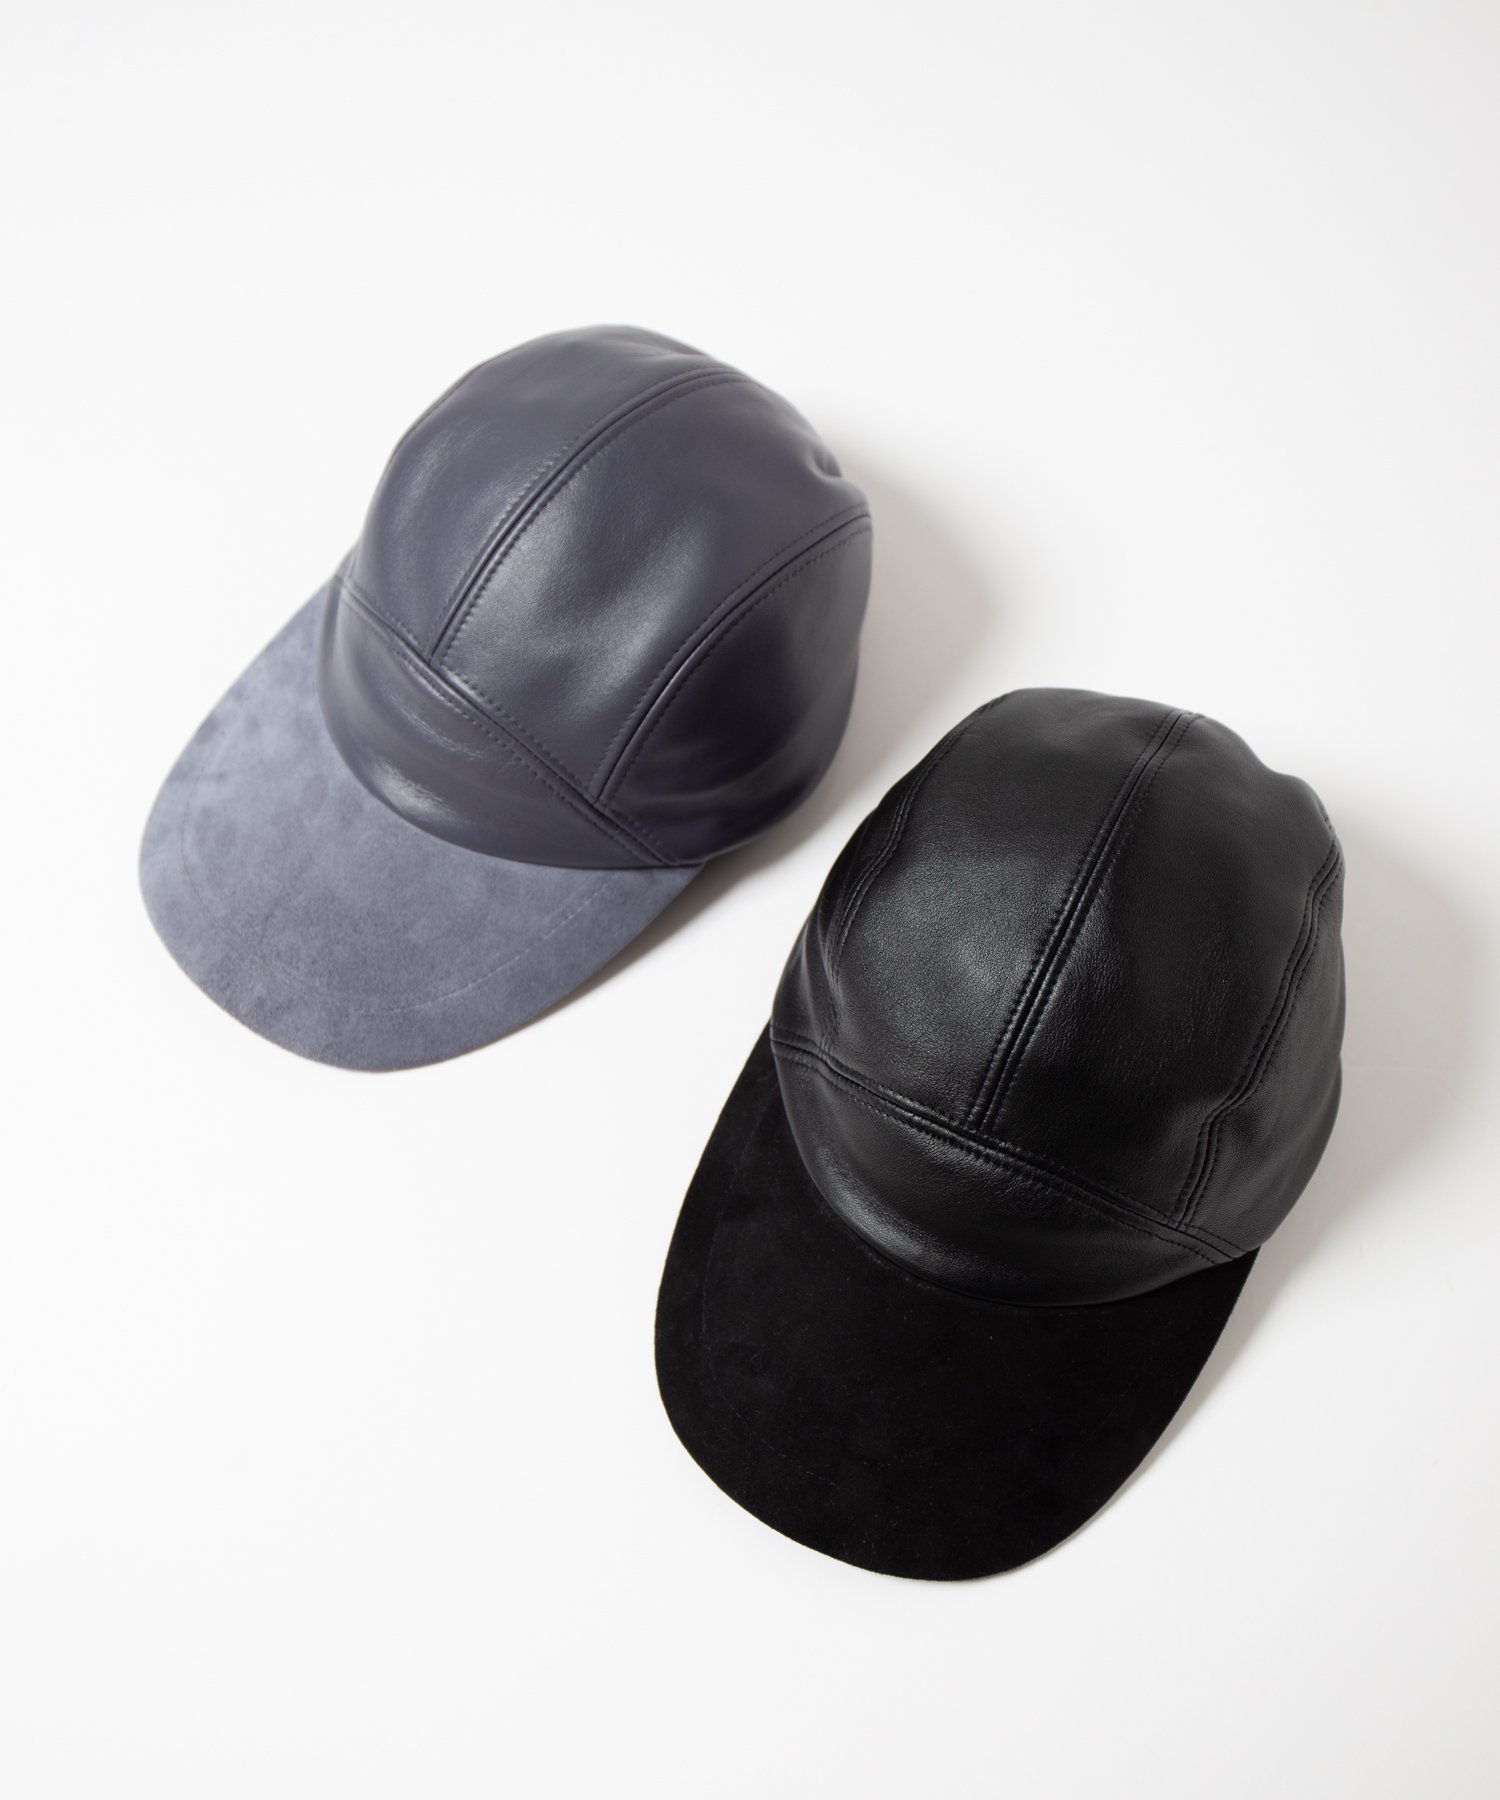 Indietro Association Leather Jet Cap 082 レザージェットキャップ